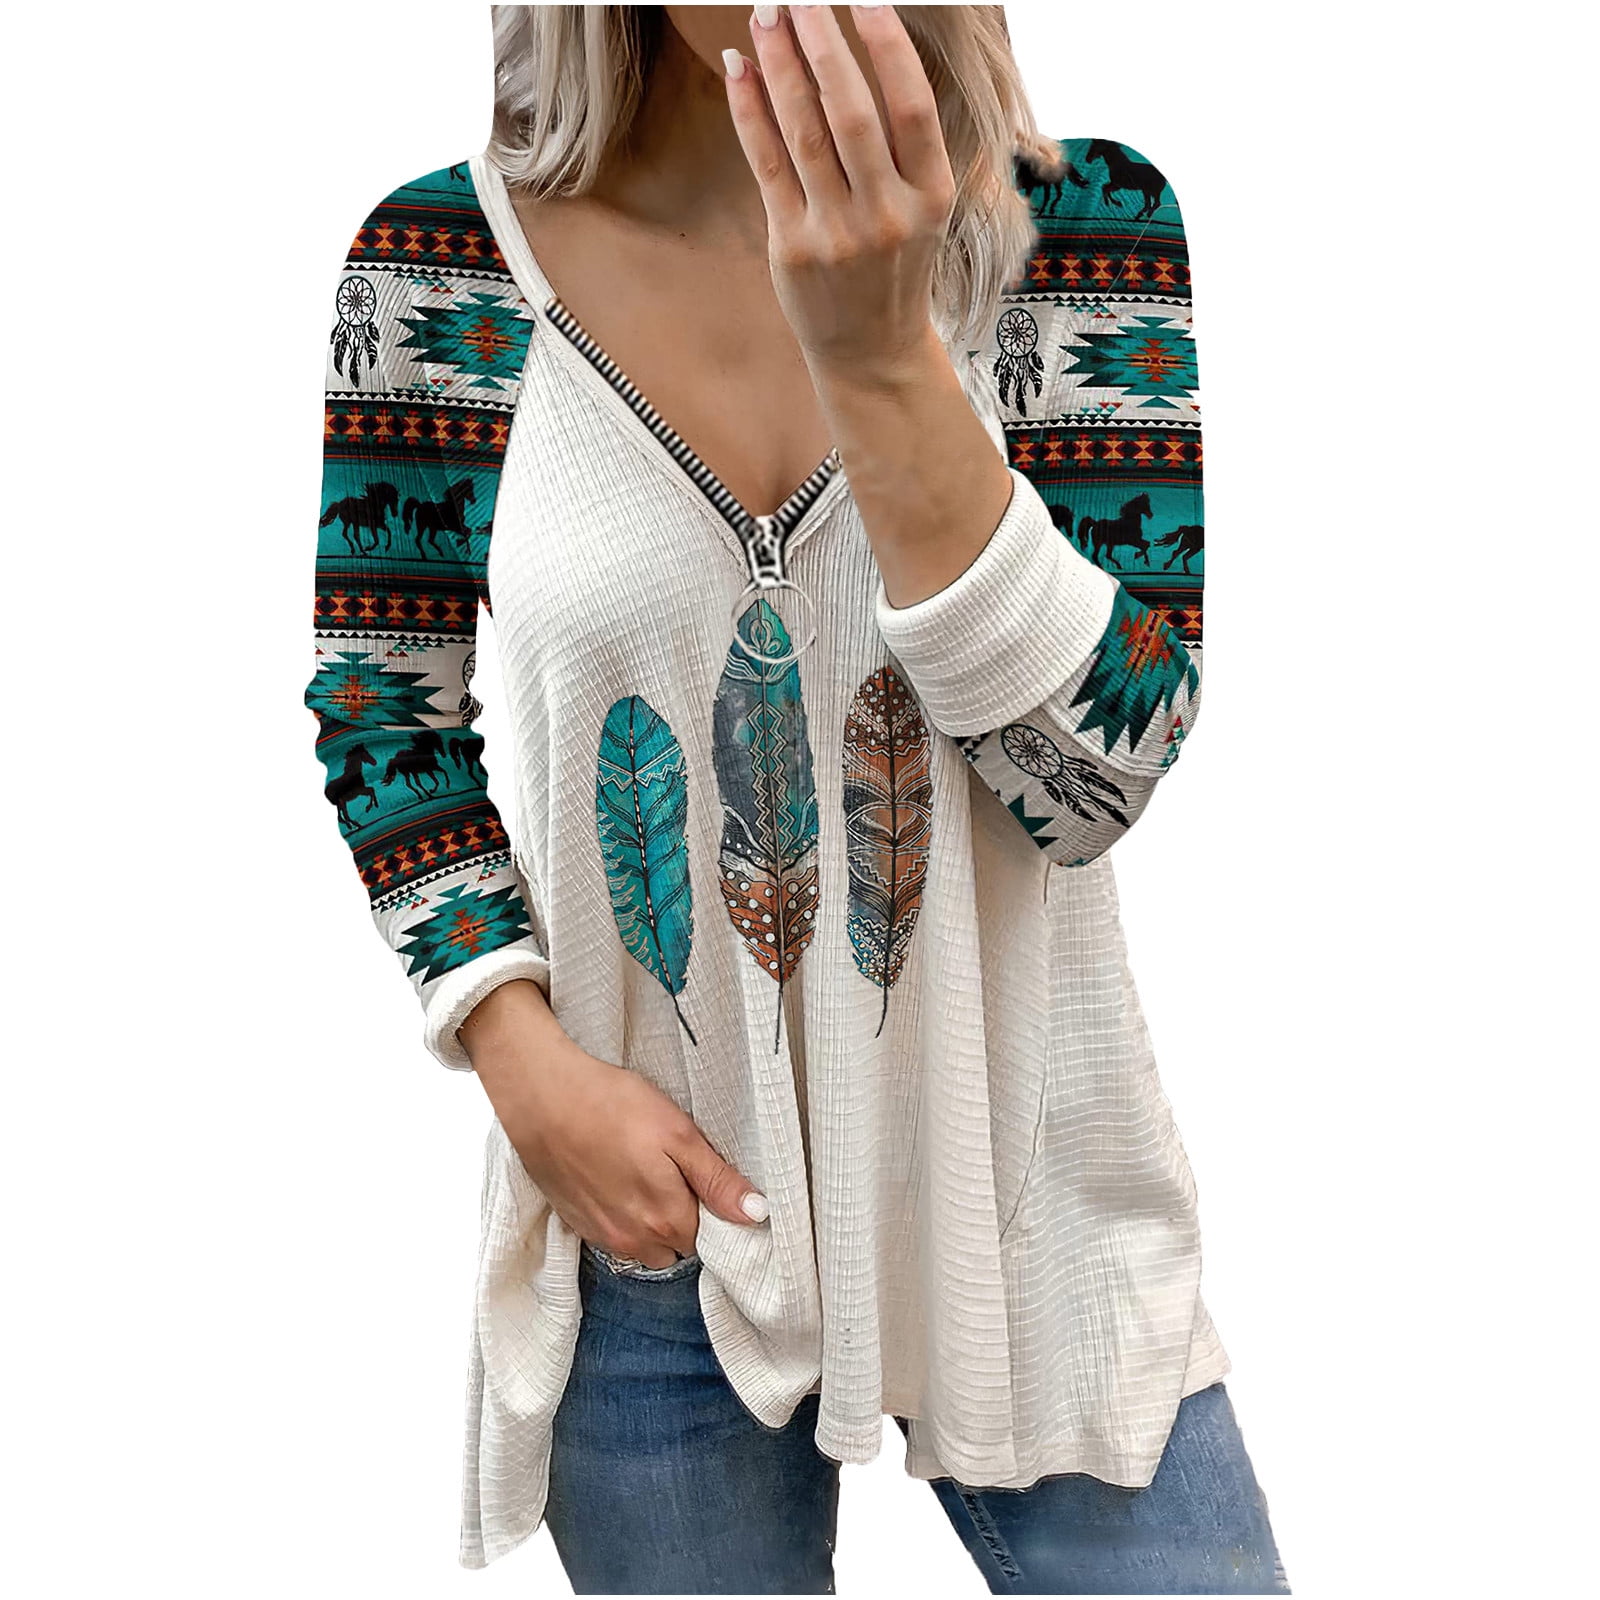 Testy Womens Plus Size Clearance Women Casual Retro Western Aztec Print Long Sleeve Ethnic V